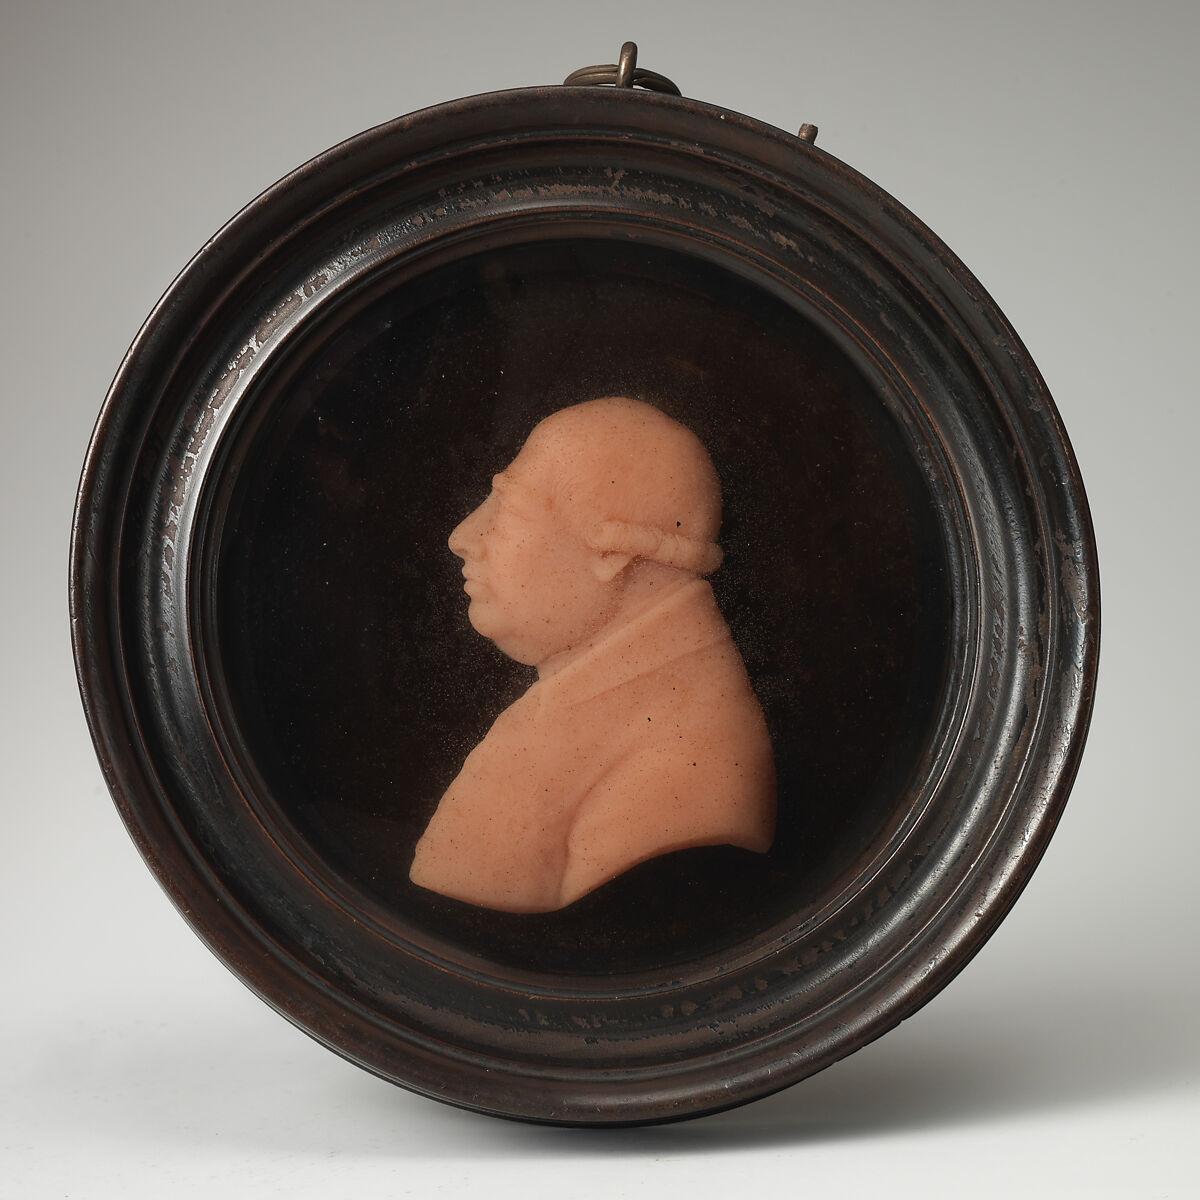 George III (1738–1820), King of England (1760–1820), Catherine Andras (born Bristol, England 1775, working 1855), Pink wax against black ground; frame: black wood and glass, British 